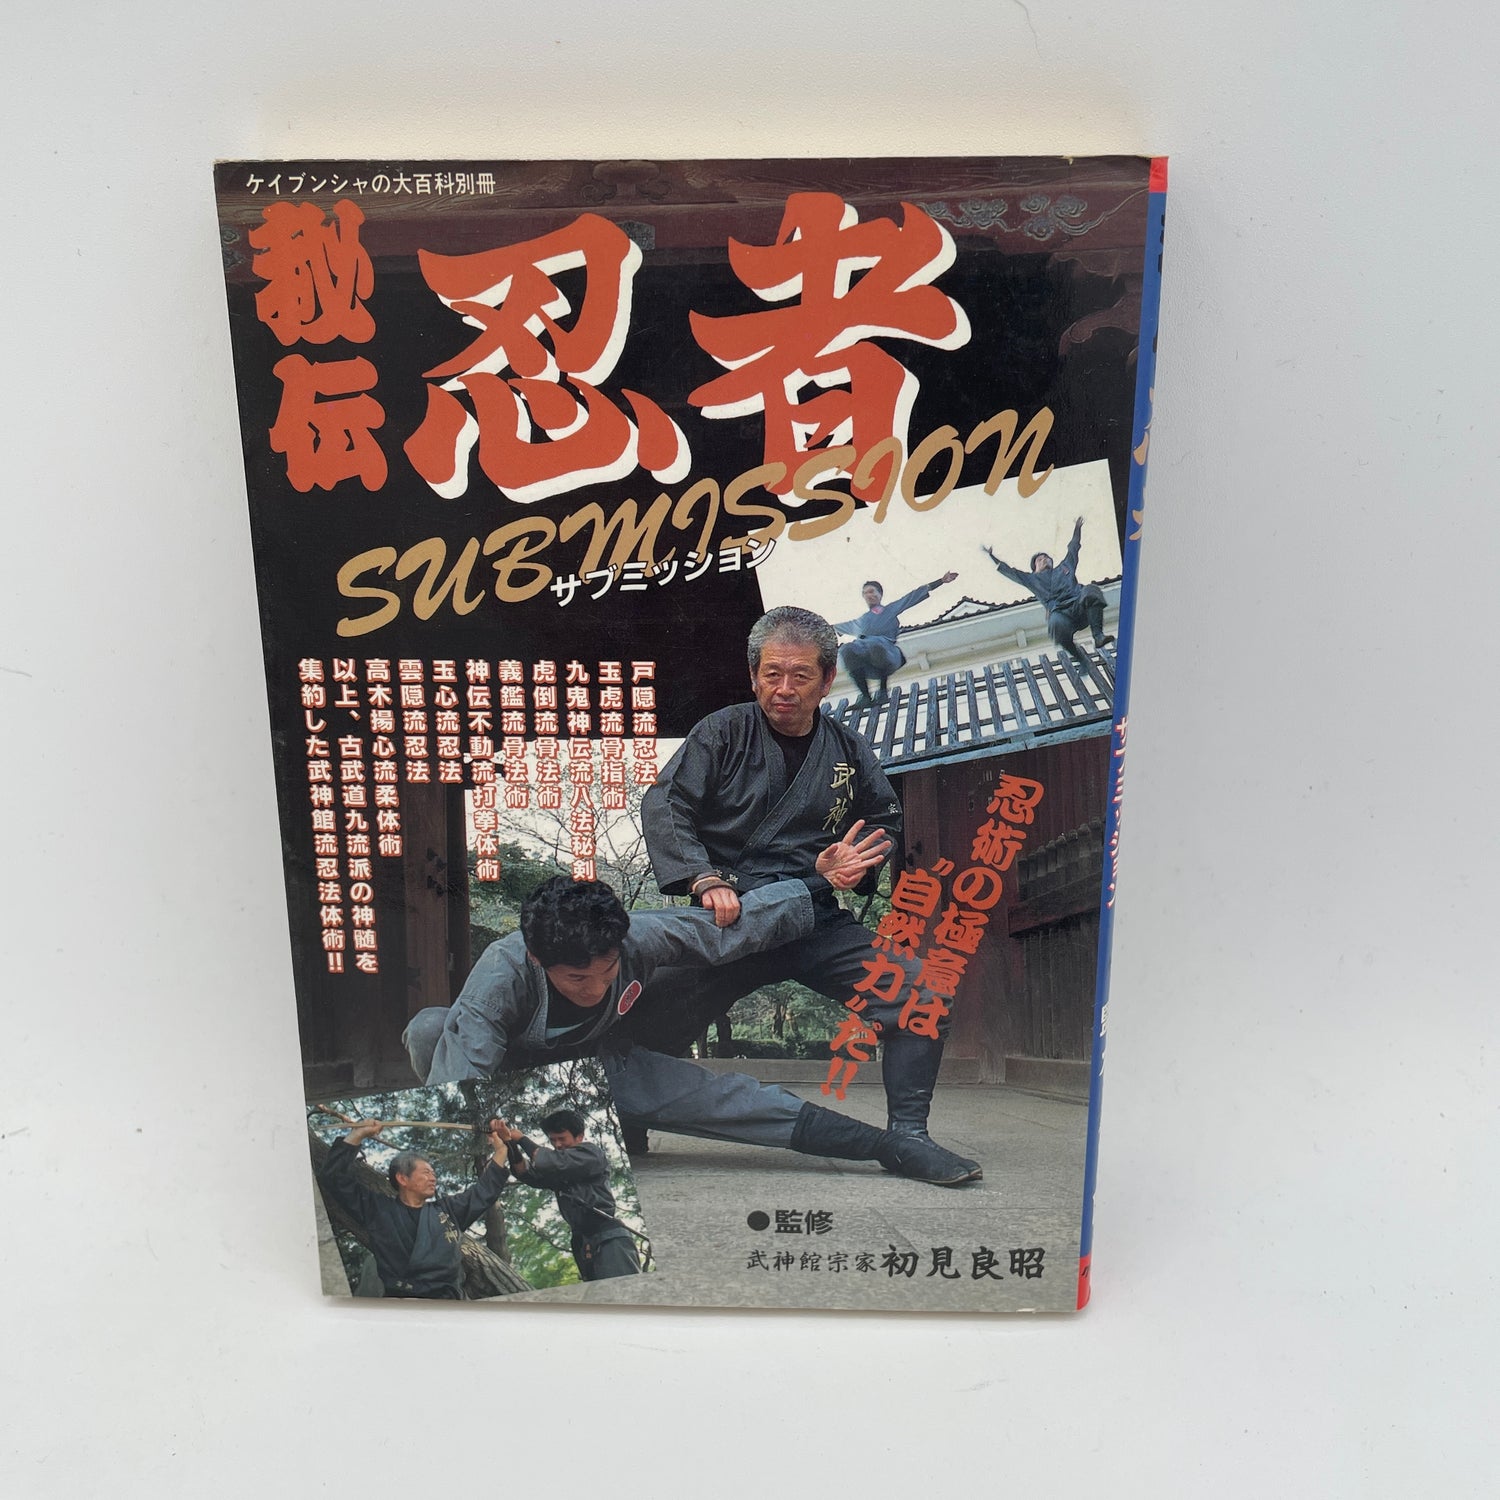 Ninja Submission Book by Masaaki Hatsumi (Preowned)